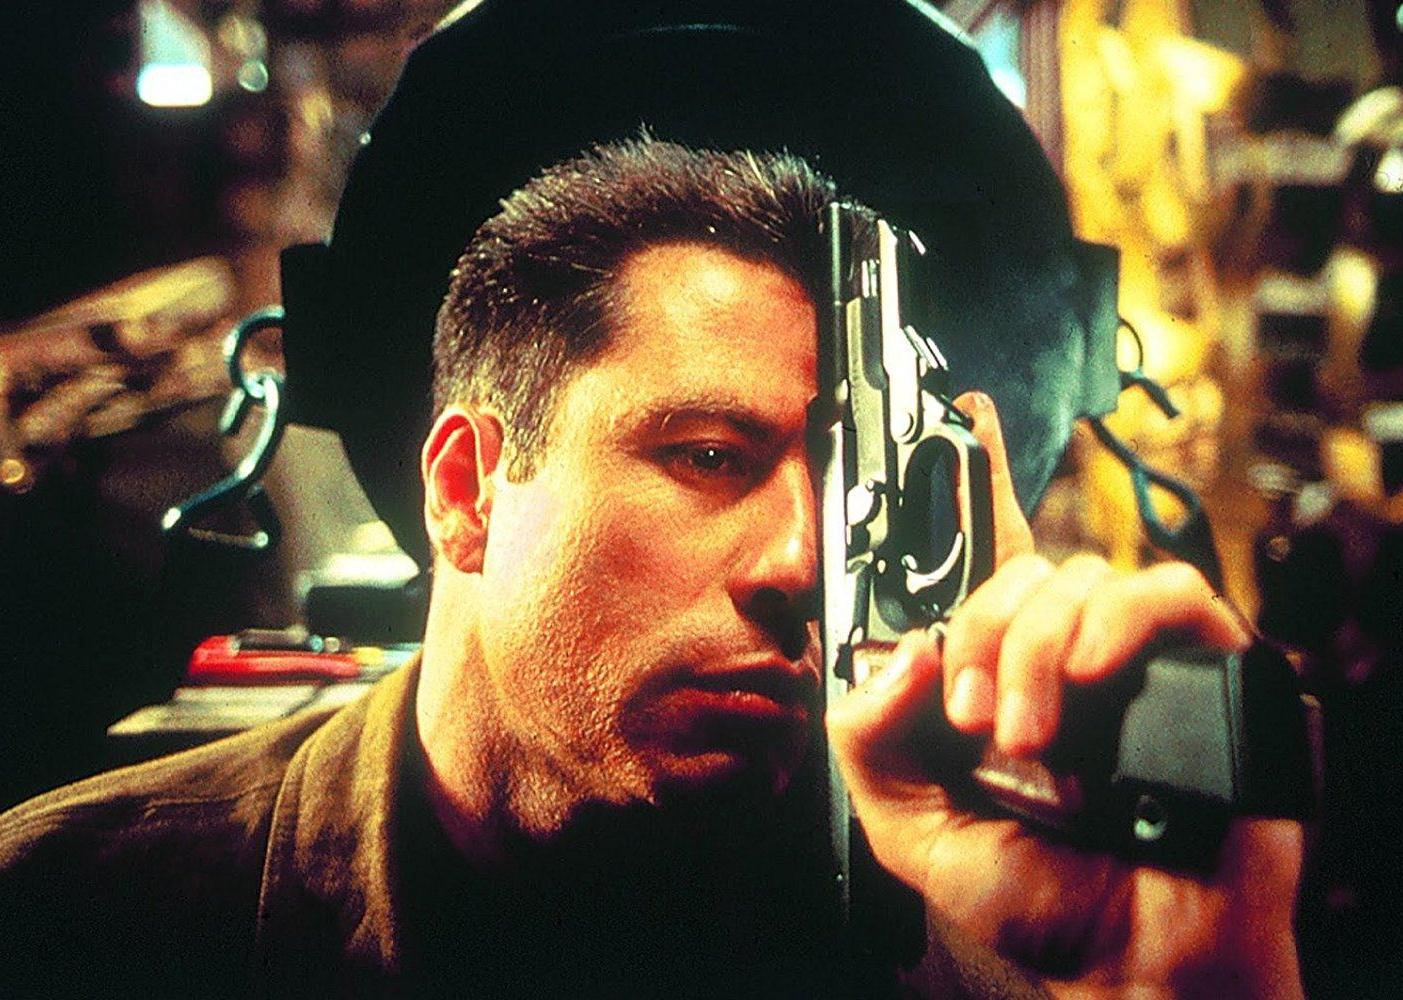 John Travolta holding a gun up against his face like he's thinking.